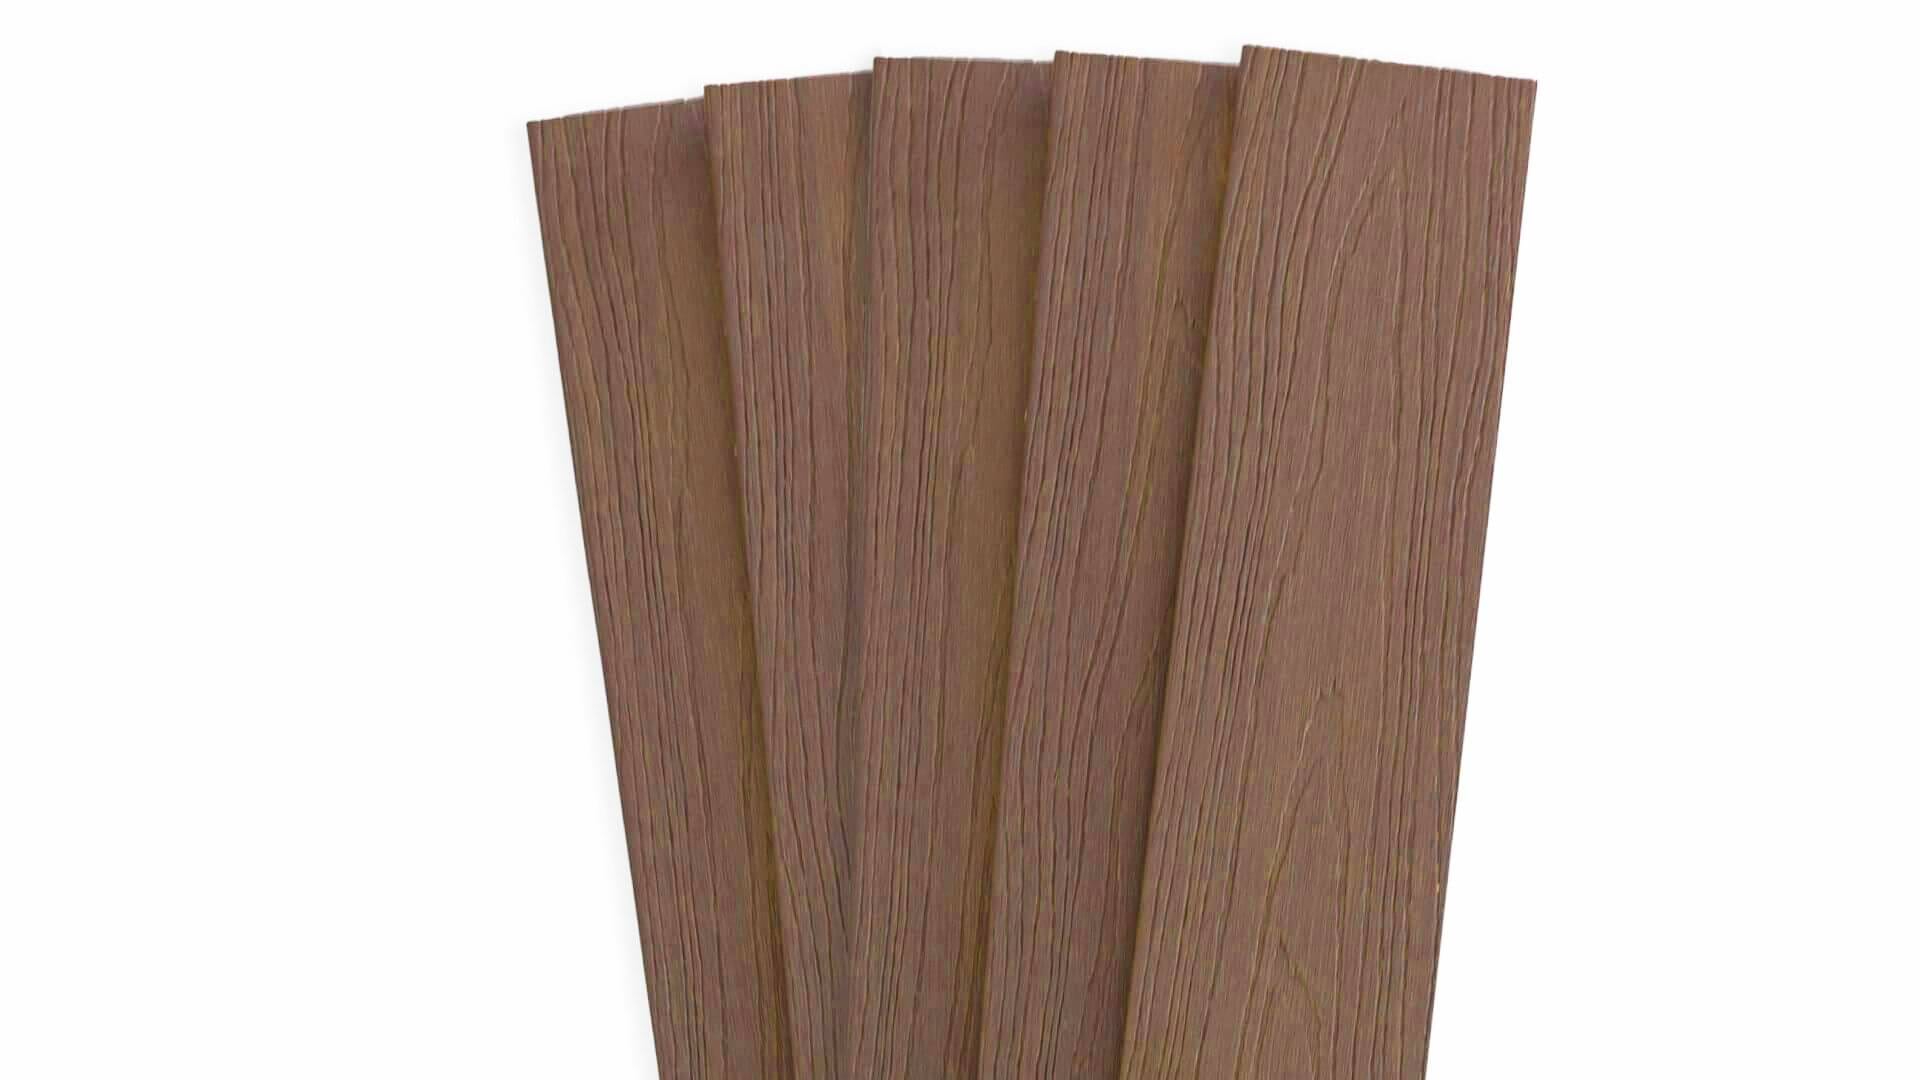 360 Cap Composite Pickets Fence Frame It All Walnut Flat Top Picket 5PK 